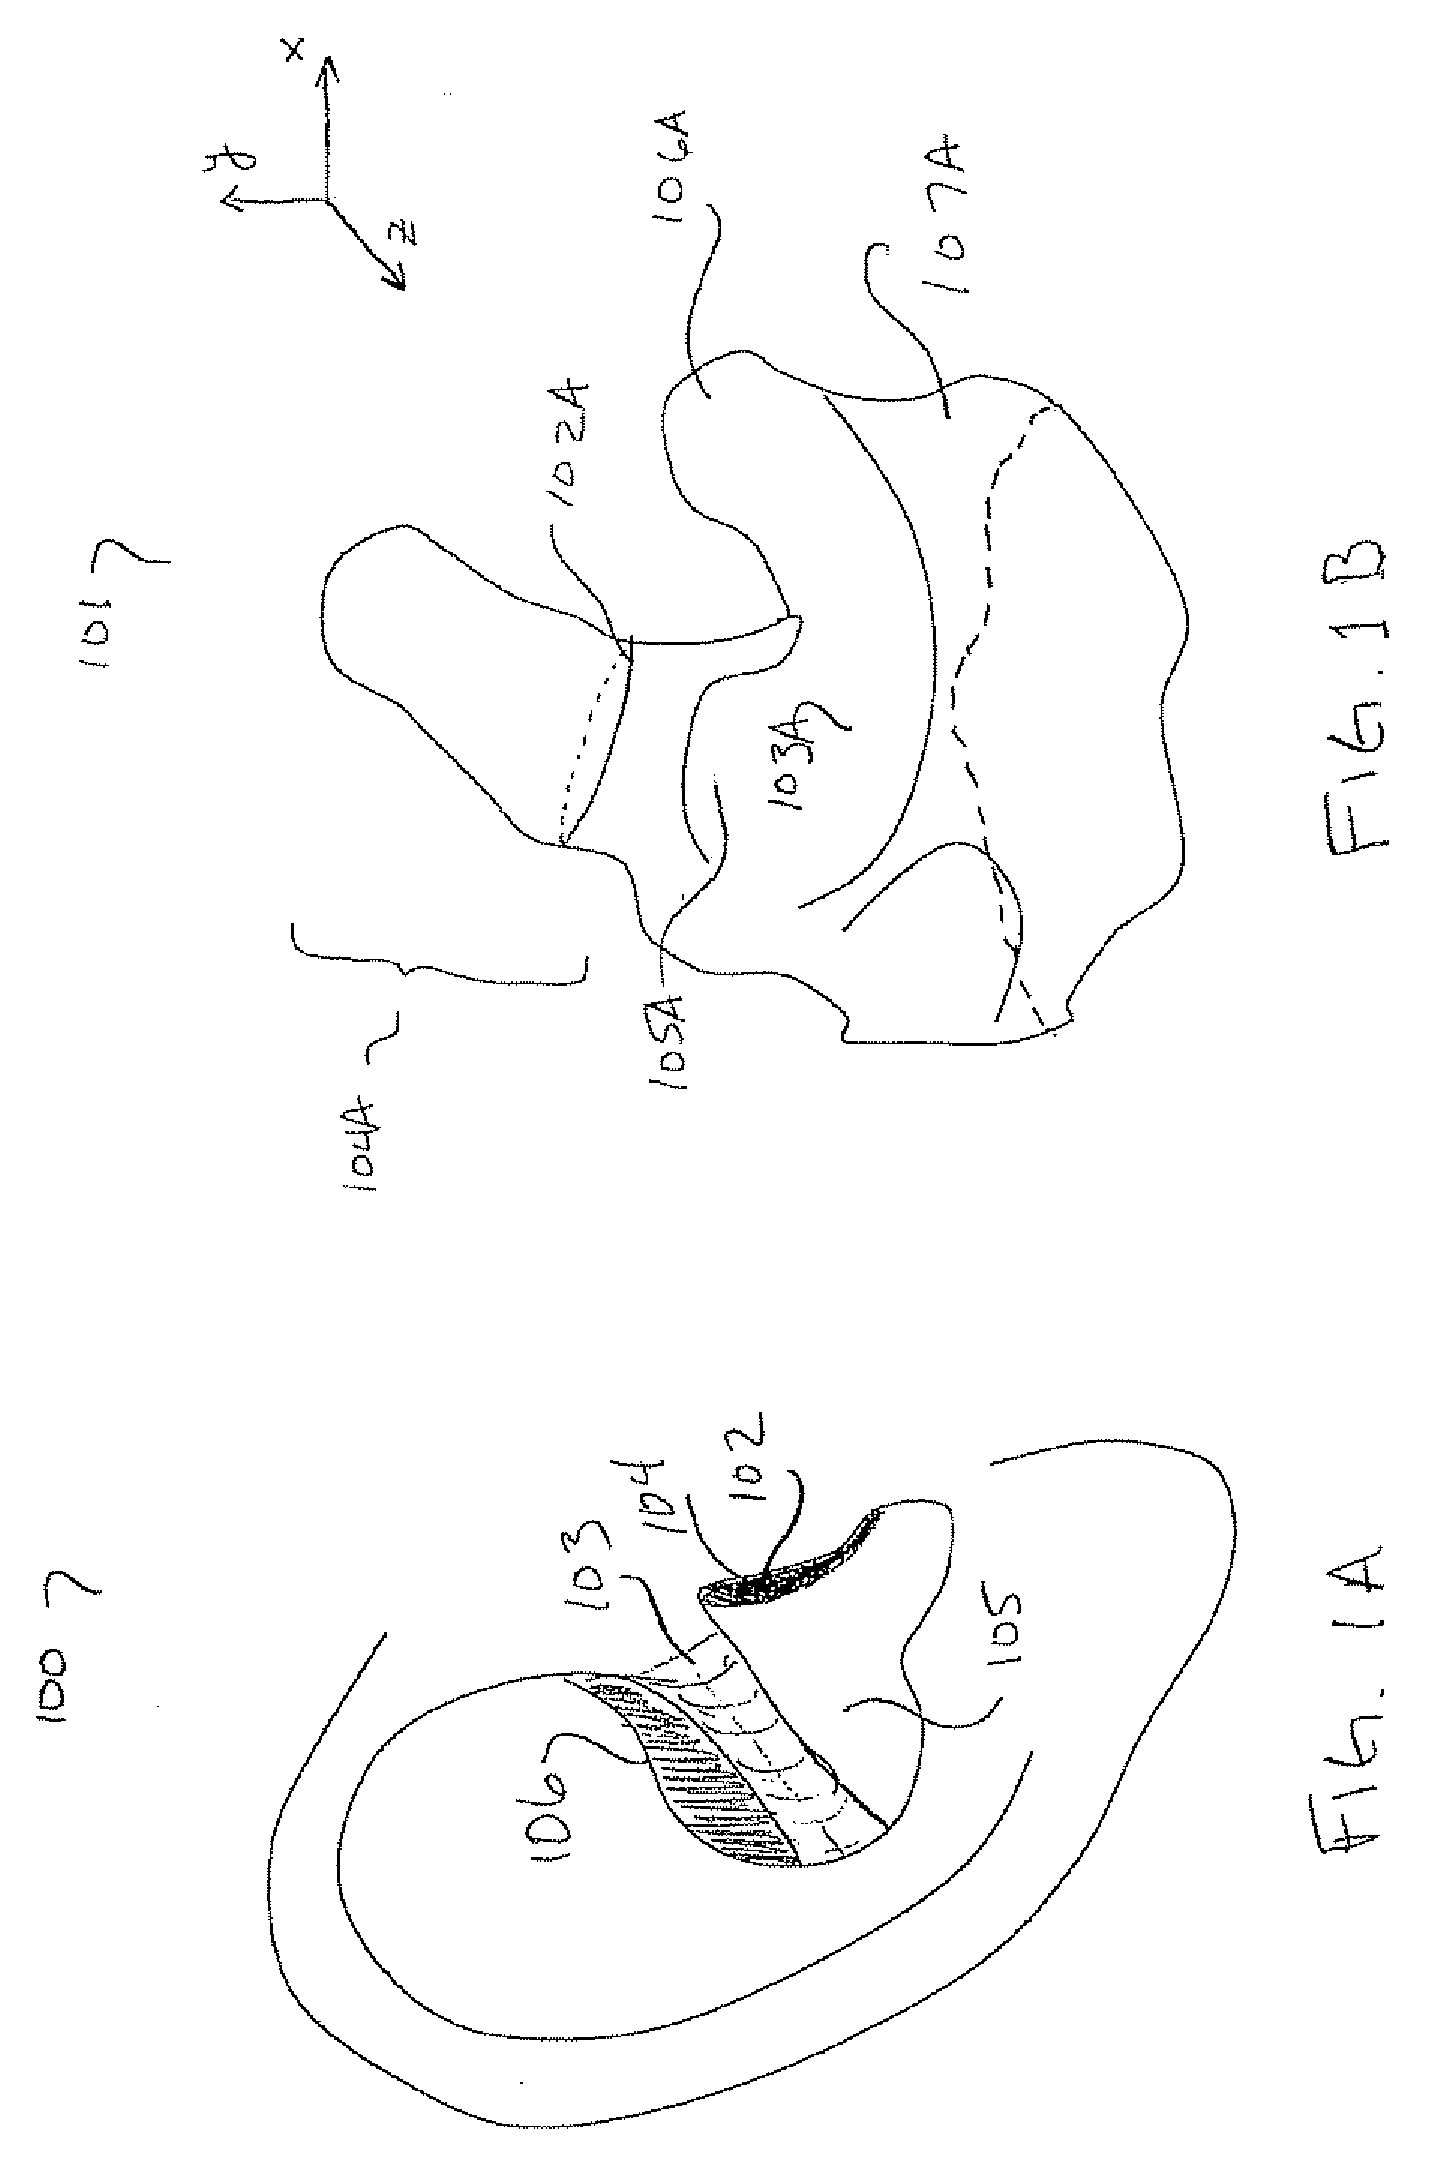 Method and Apparatus for Ear Canal Surface Modeling Using Optical Coherence Tomography Imaging